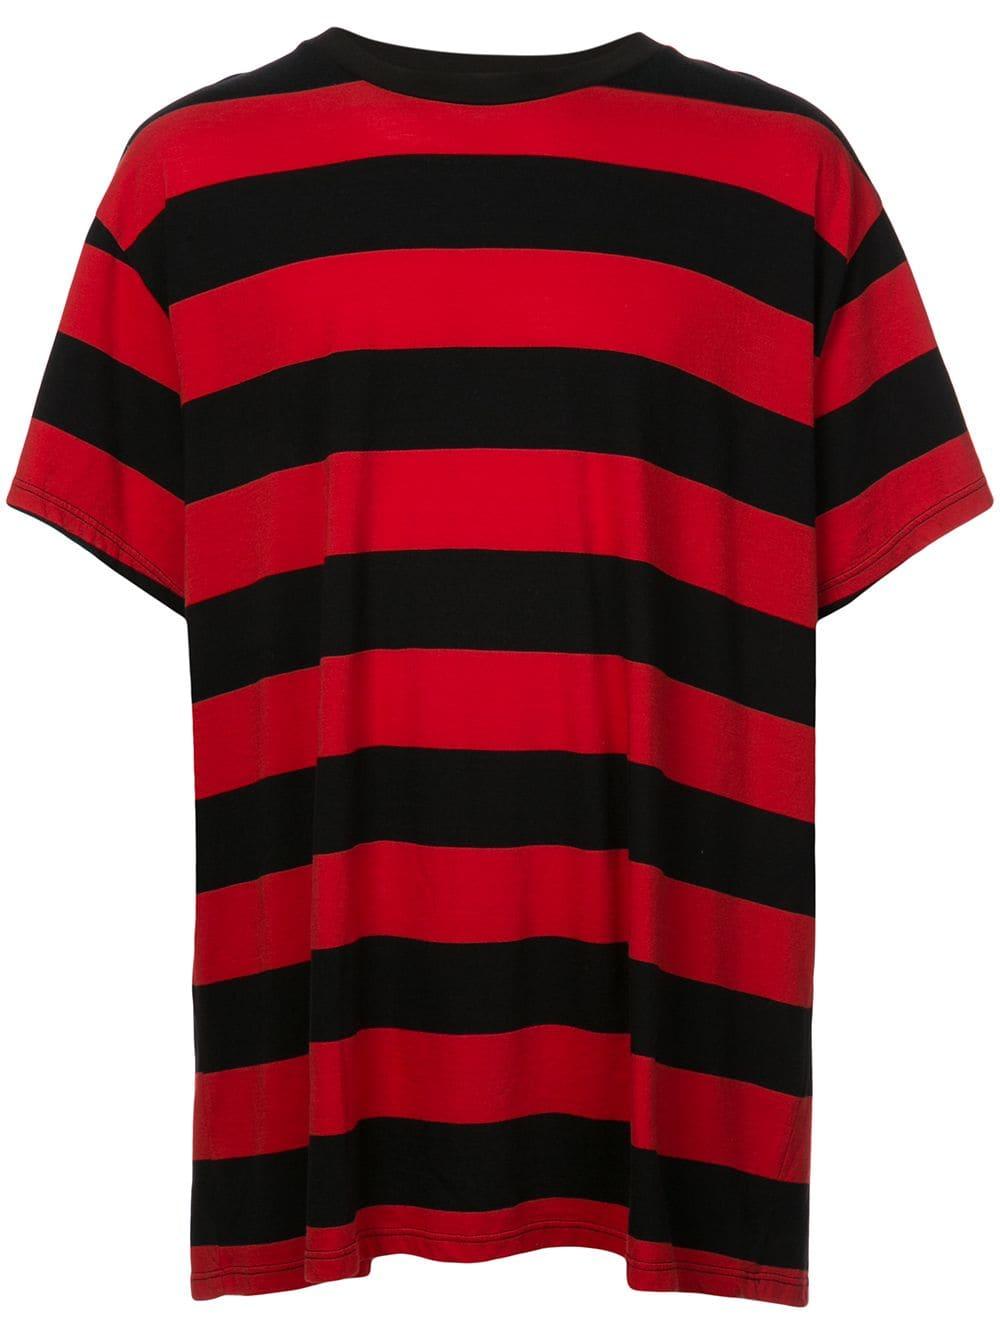 Amiri Cotton Striped Oversized T-shirt in Red for Men - Lyst